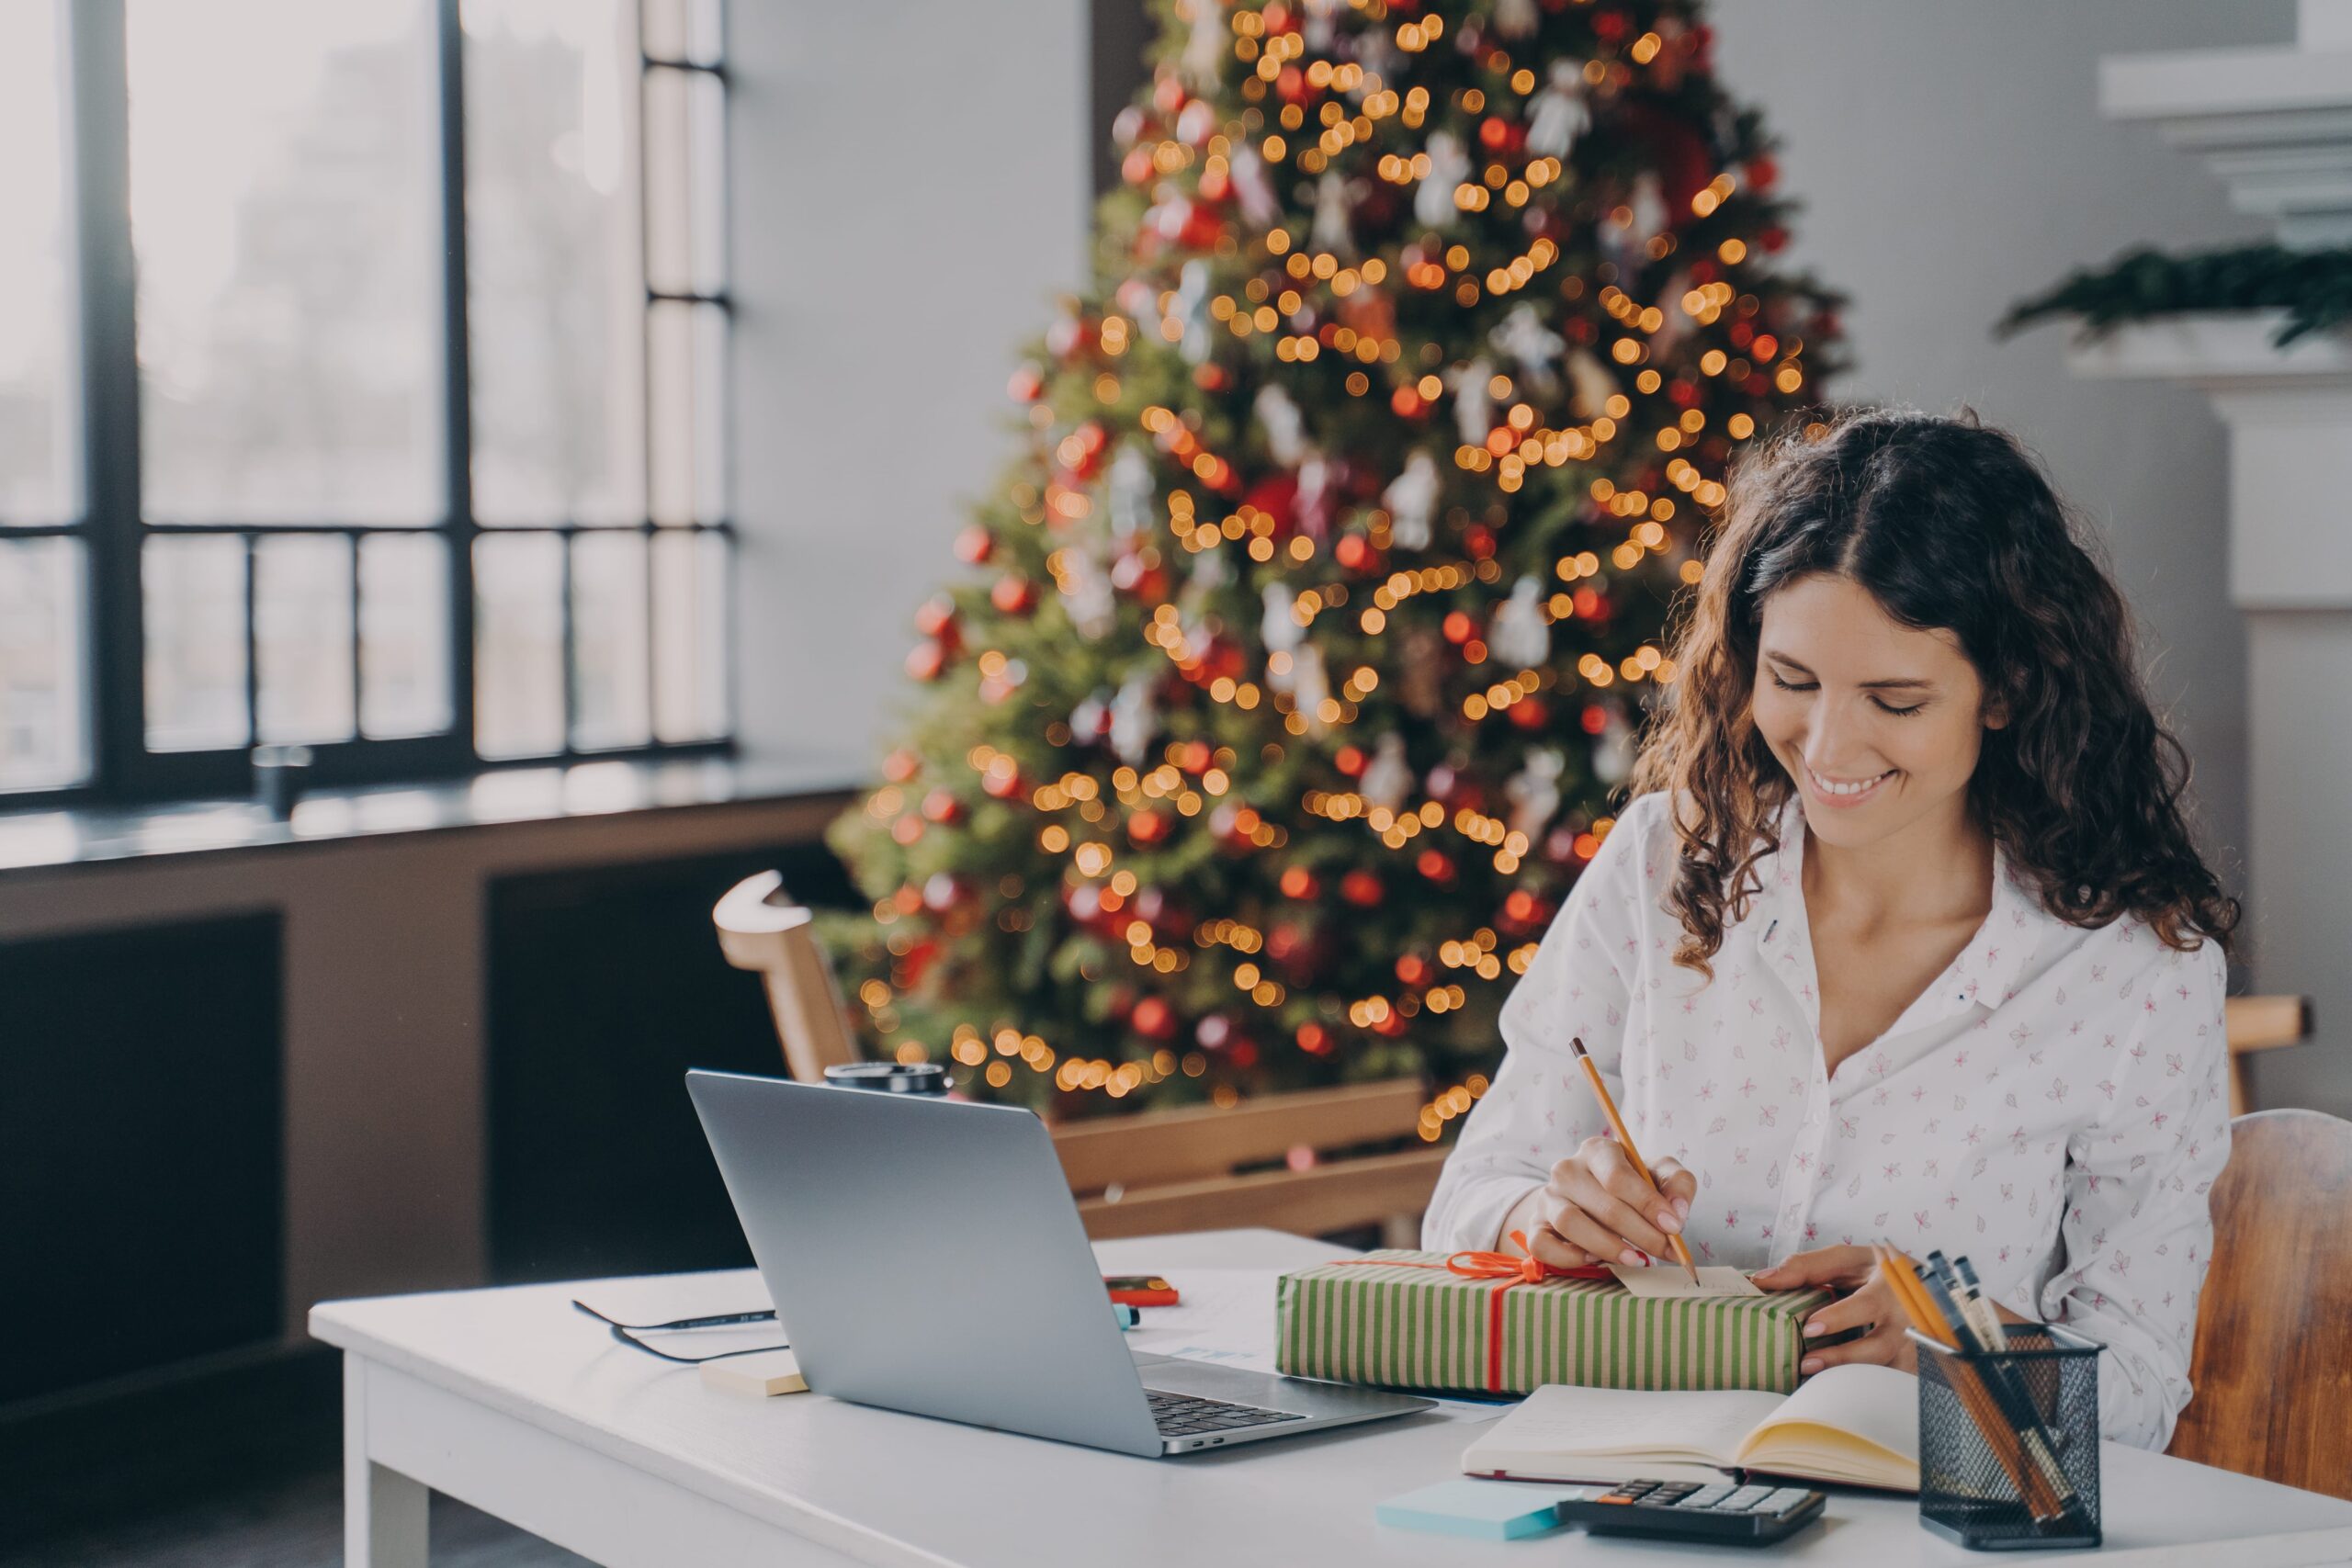 Start a video marketing campaign for the holidays